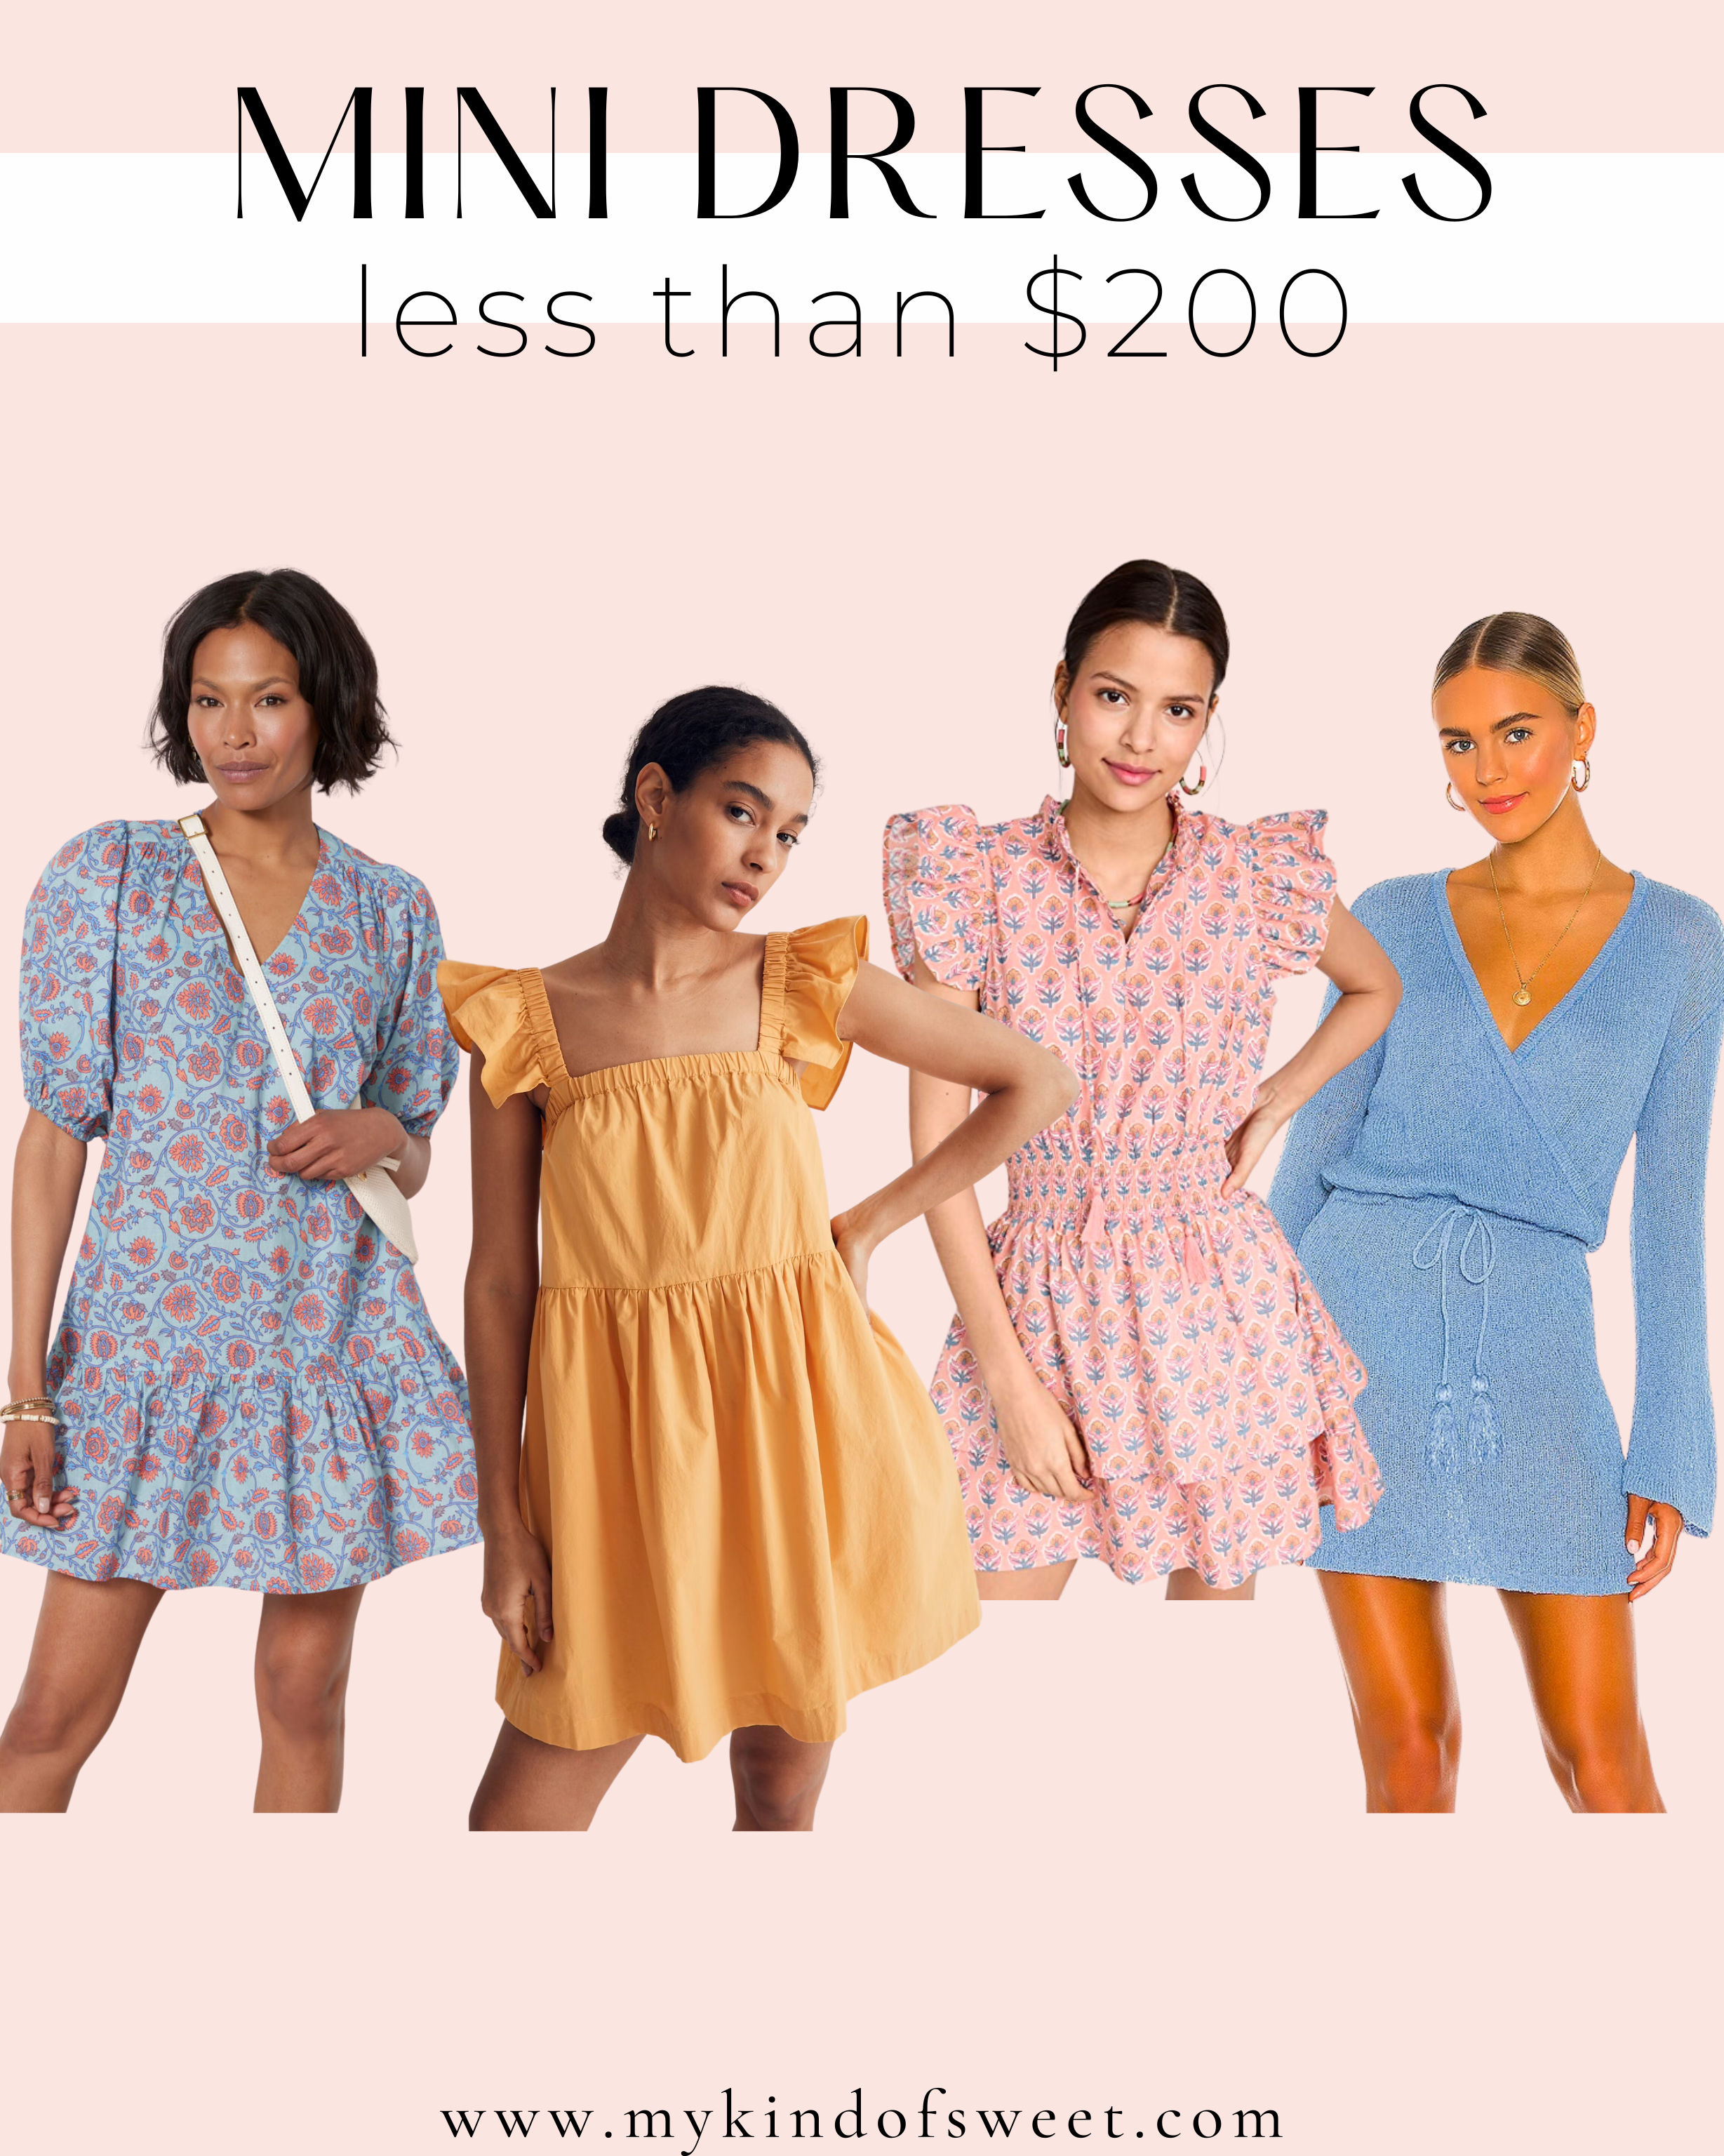 A collage of mini dresses less than $200